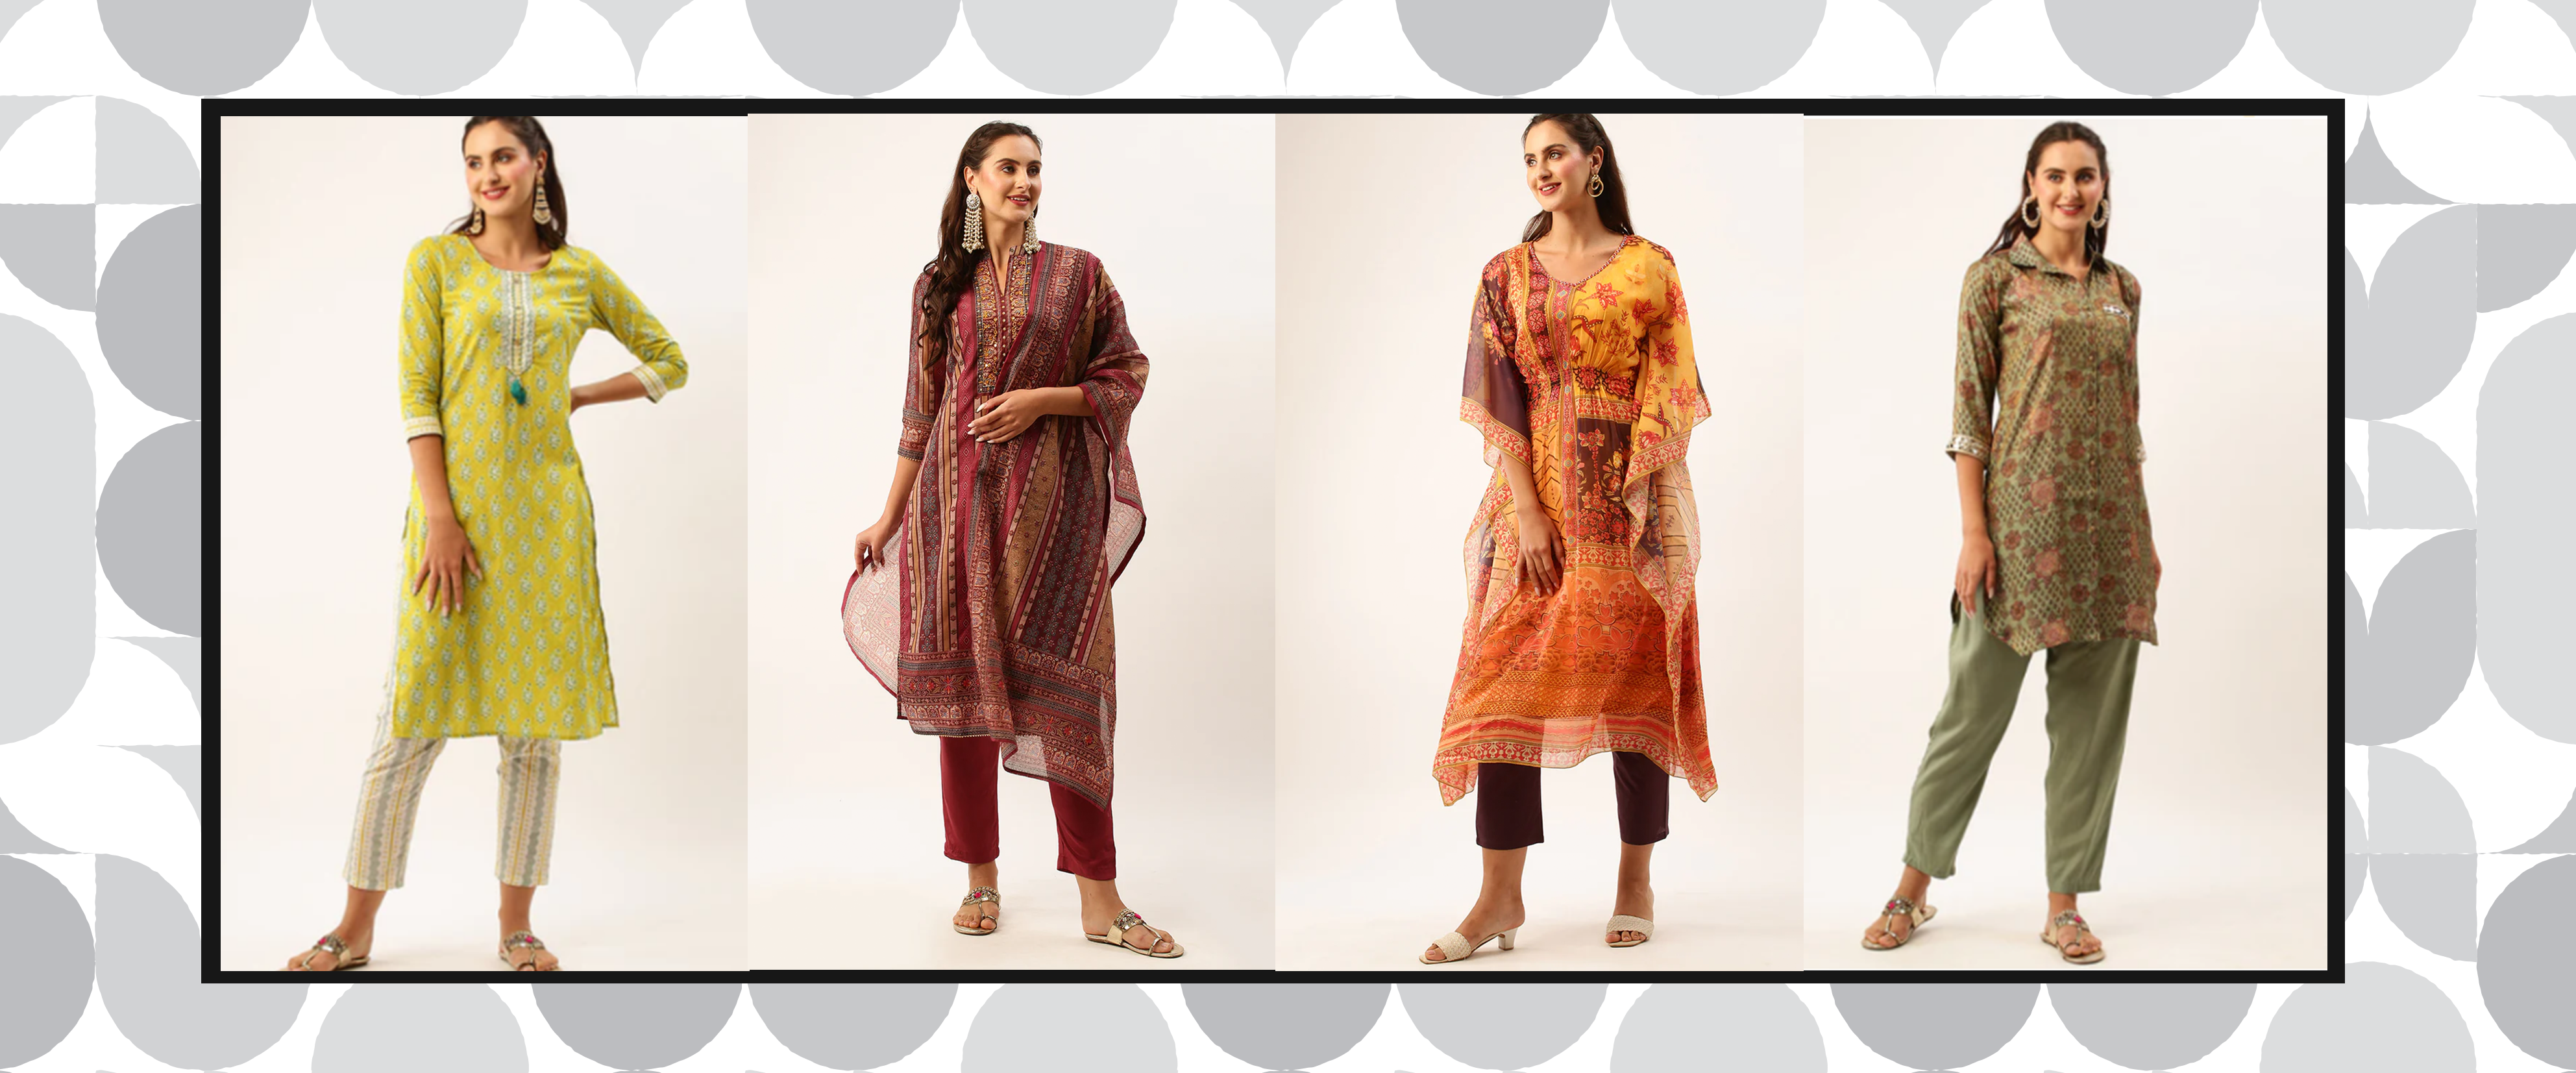 Celebrate this Eid With These Elegant Fashion-Forward Outfits